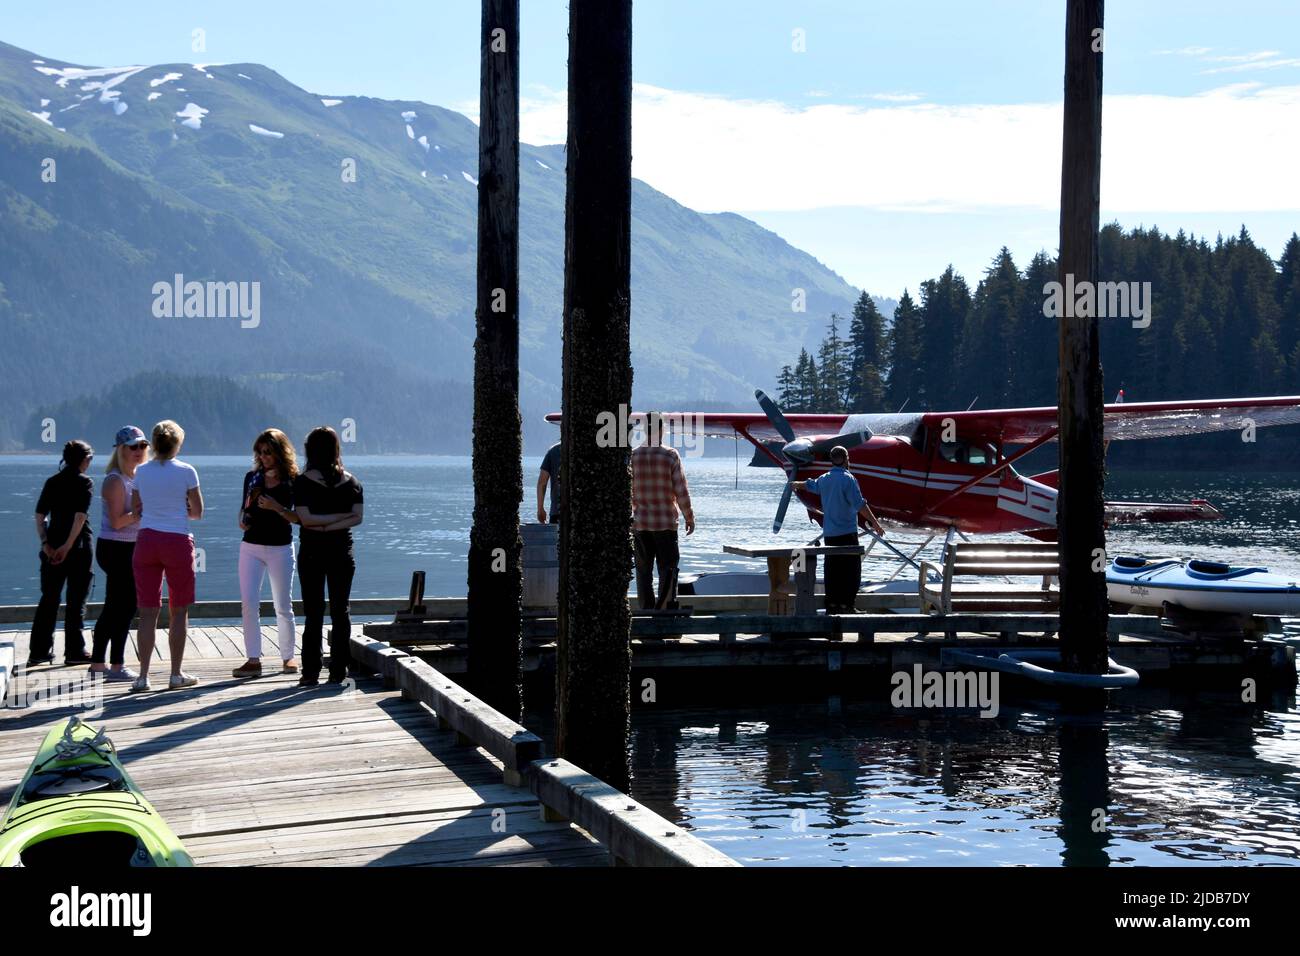 Guests at a lodge in Kachemak Bay wait for the arrival of a float plane to take them to their next destination in Alaska. Stock Photo